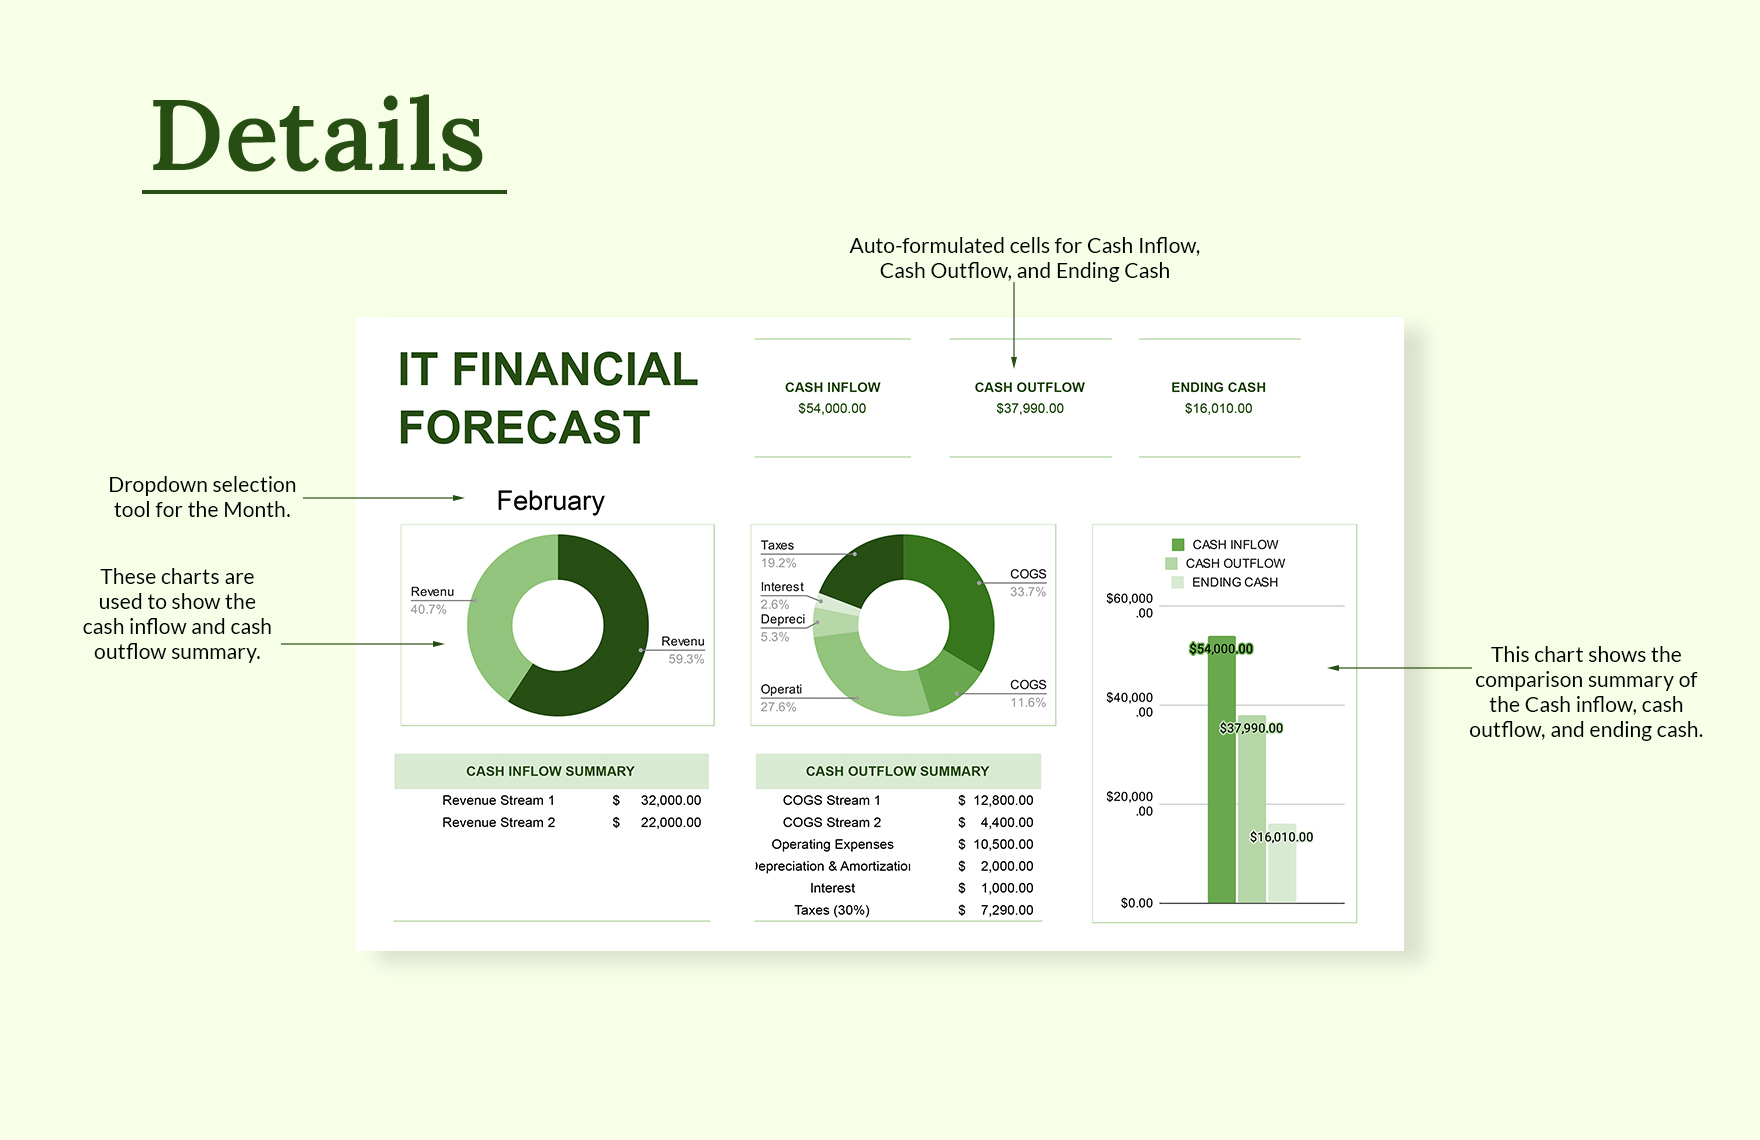 IT Financial Forecast Template